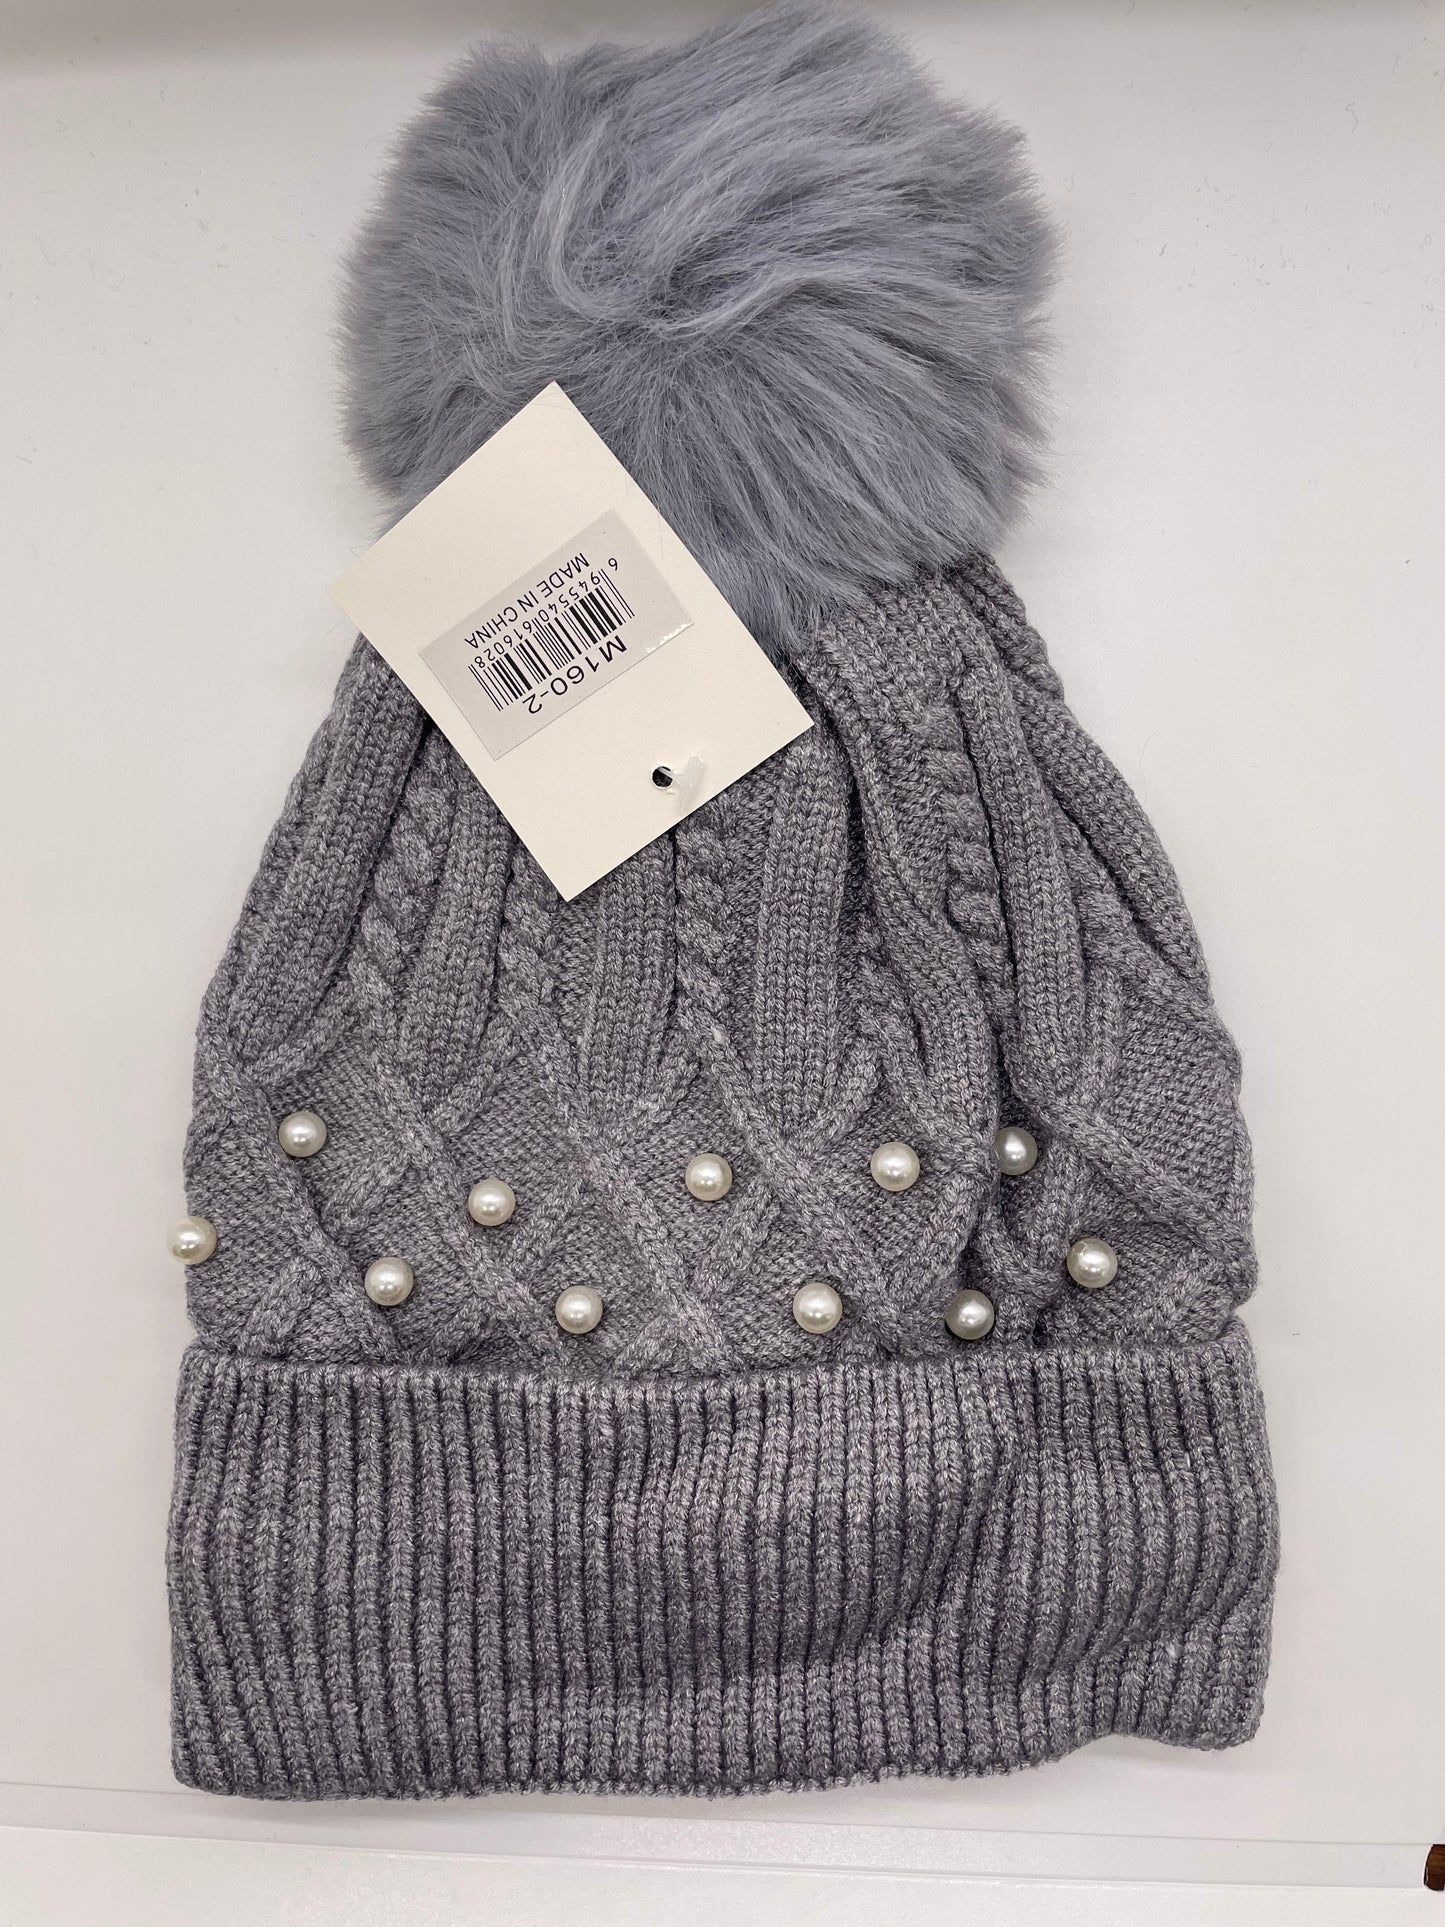 "Gray women's toboggan hat with a ribbed knit texture and a moisture-wicking design"